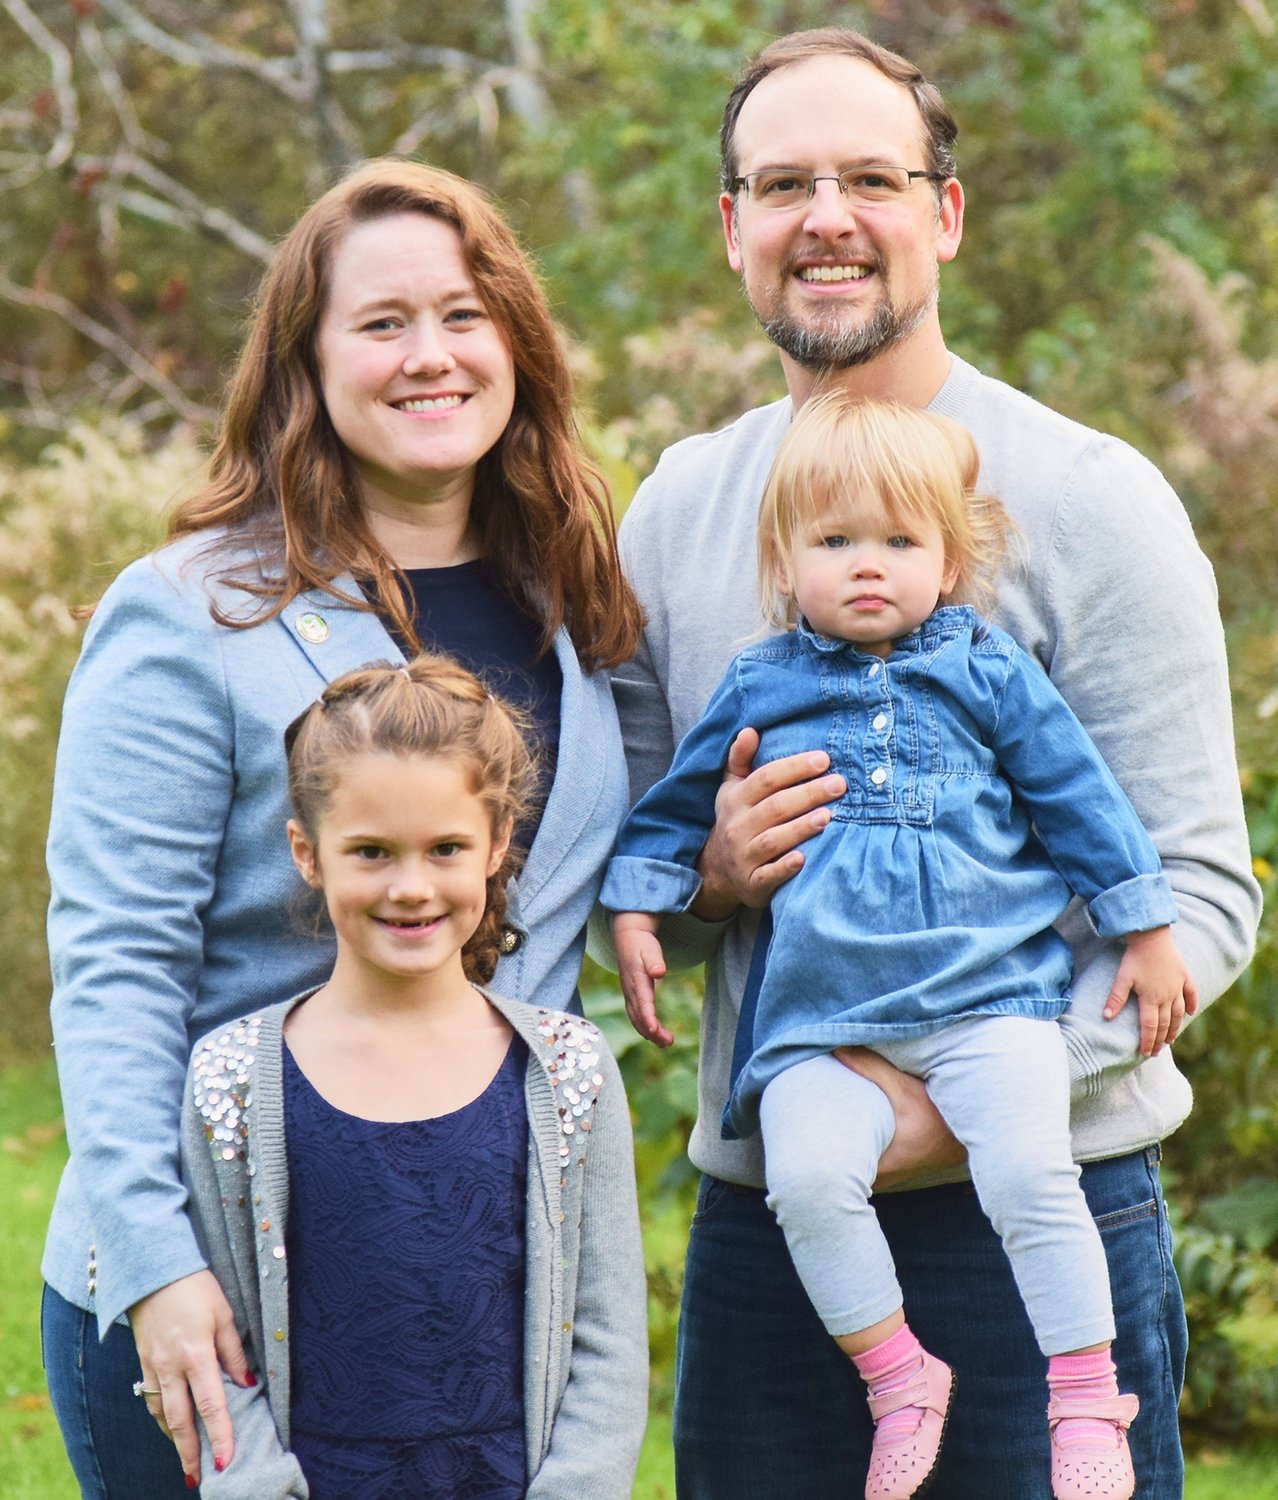 Rhonda Youngs is running for Madison County Judge on a write-in ballot and has received support from the Madison County Democrats, Republicans, and Conservatives. She is shown above with husband, Jim, and their two children.